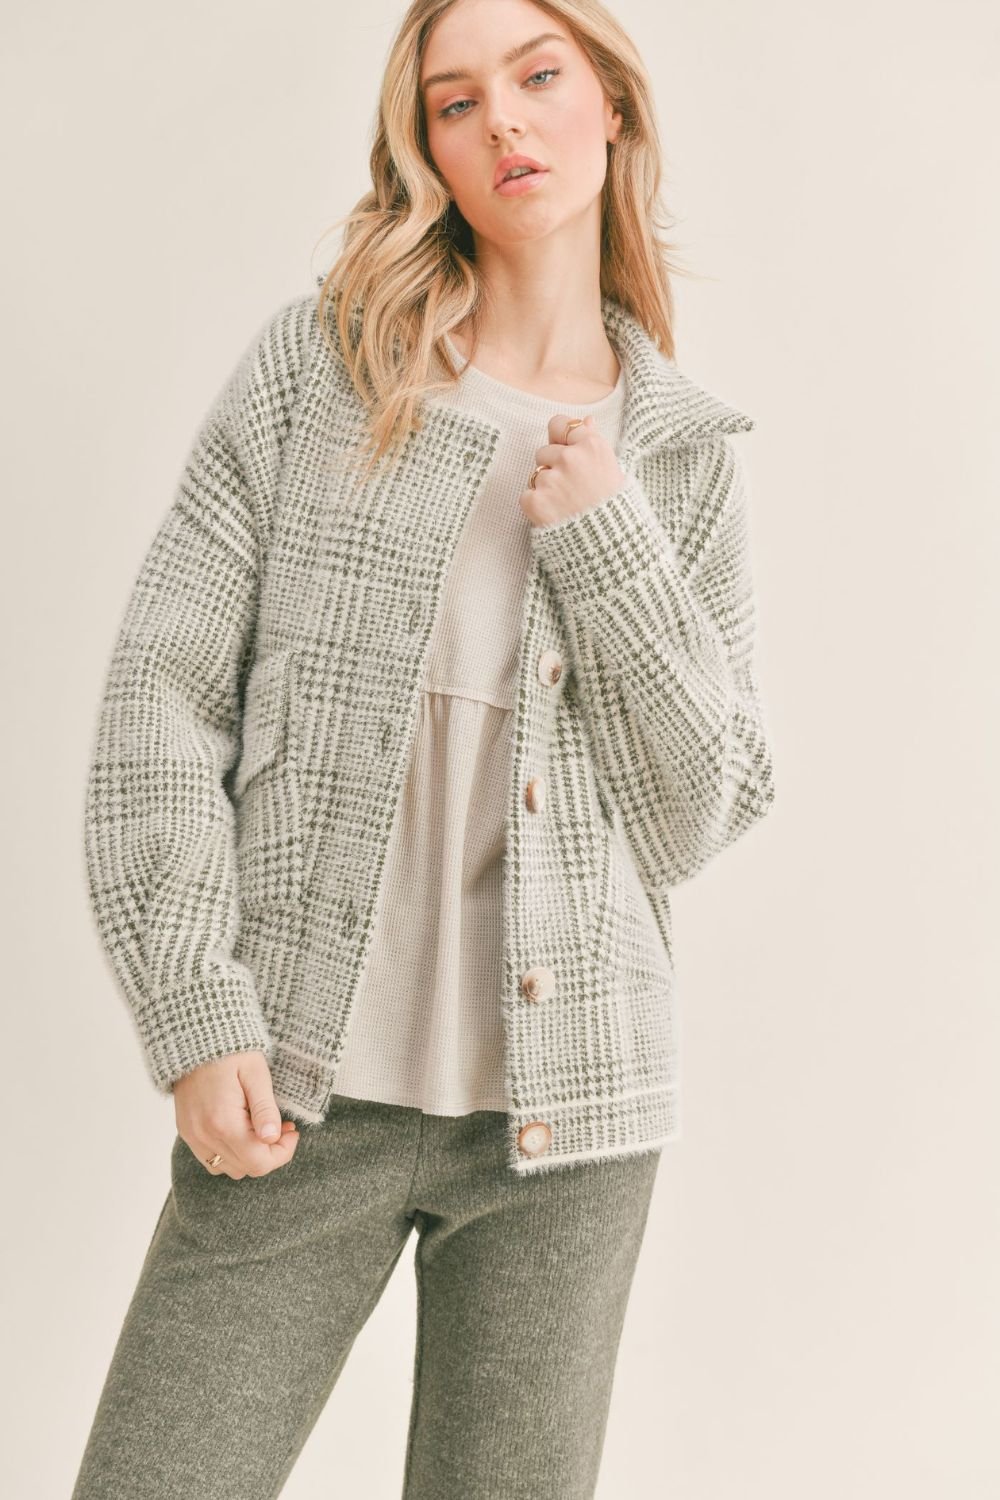 Women's Plaid Sweater Jacket | Sage The Label | Ivory Olive - Women's Shirts & Tops - Blooming Daily